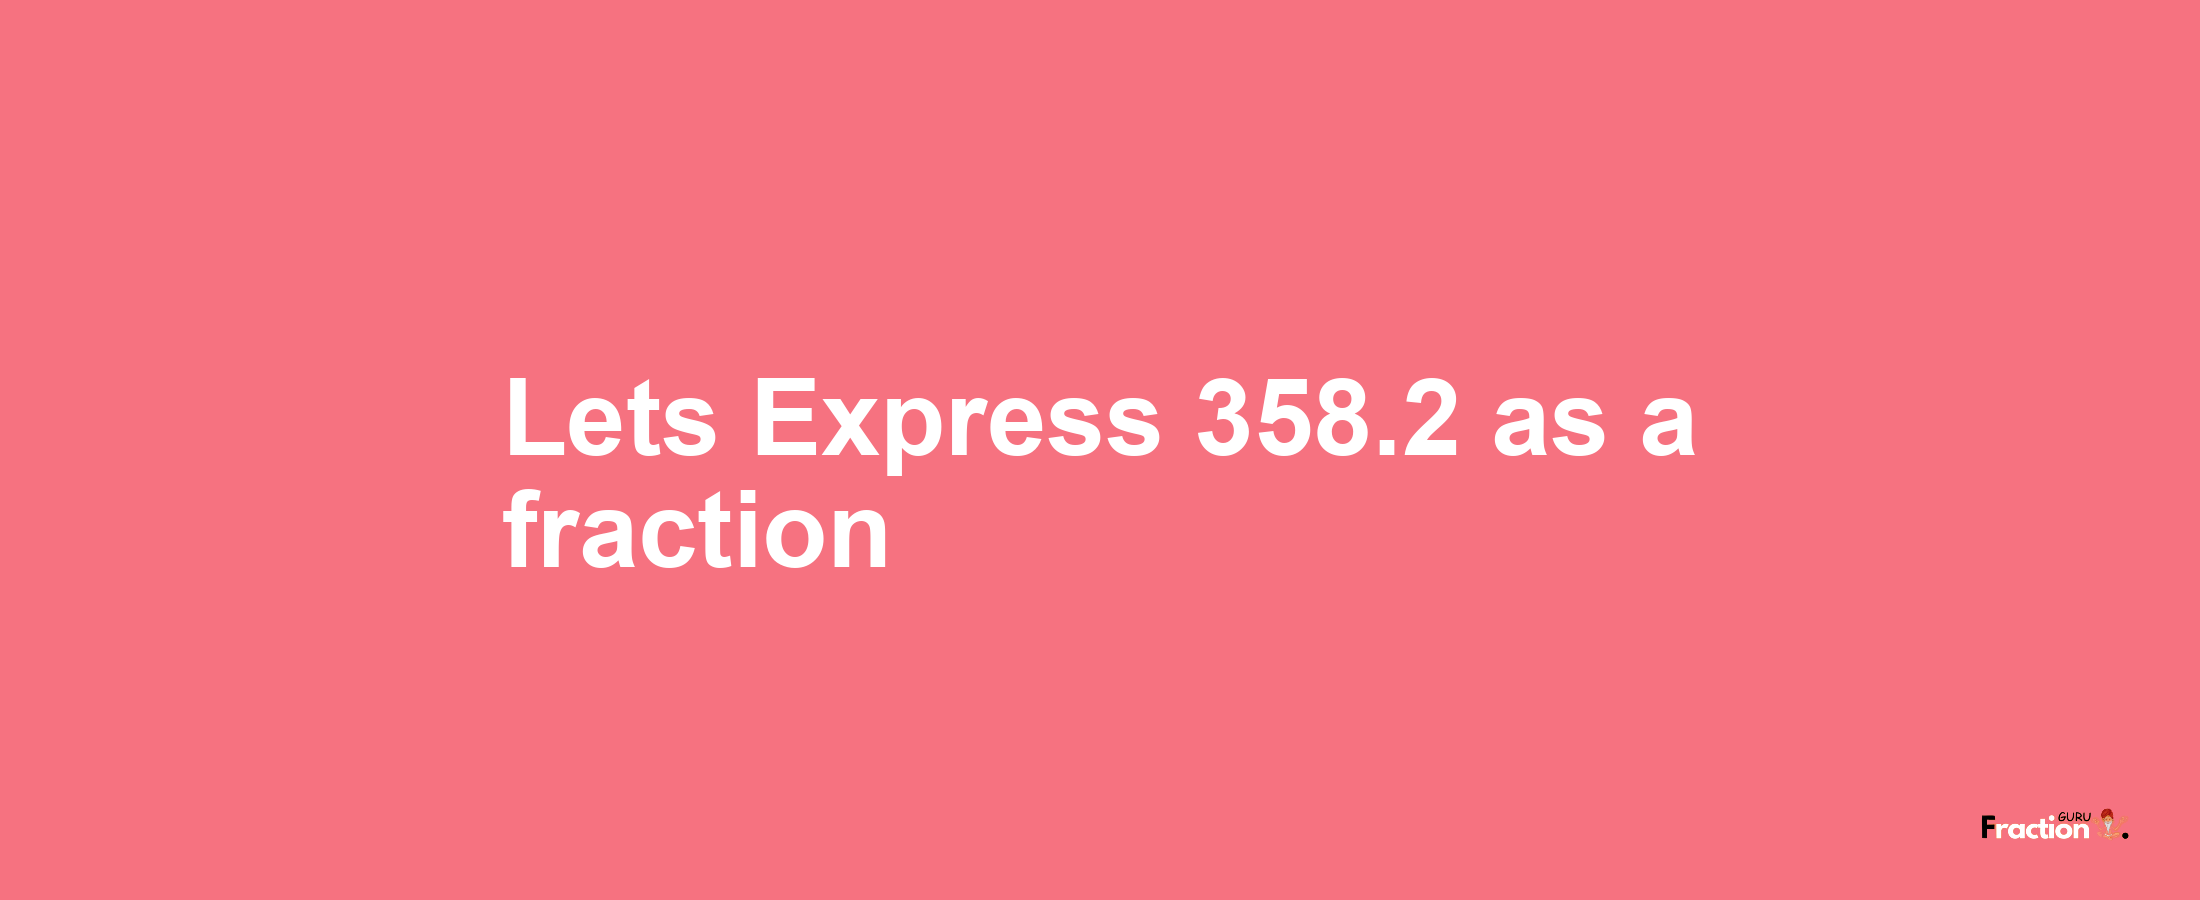 Lets Express 358.2 as afraction